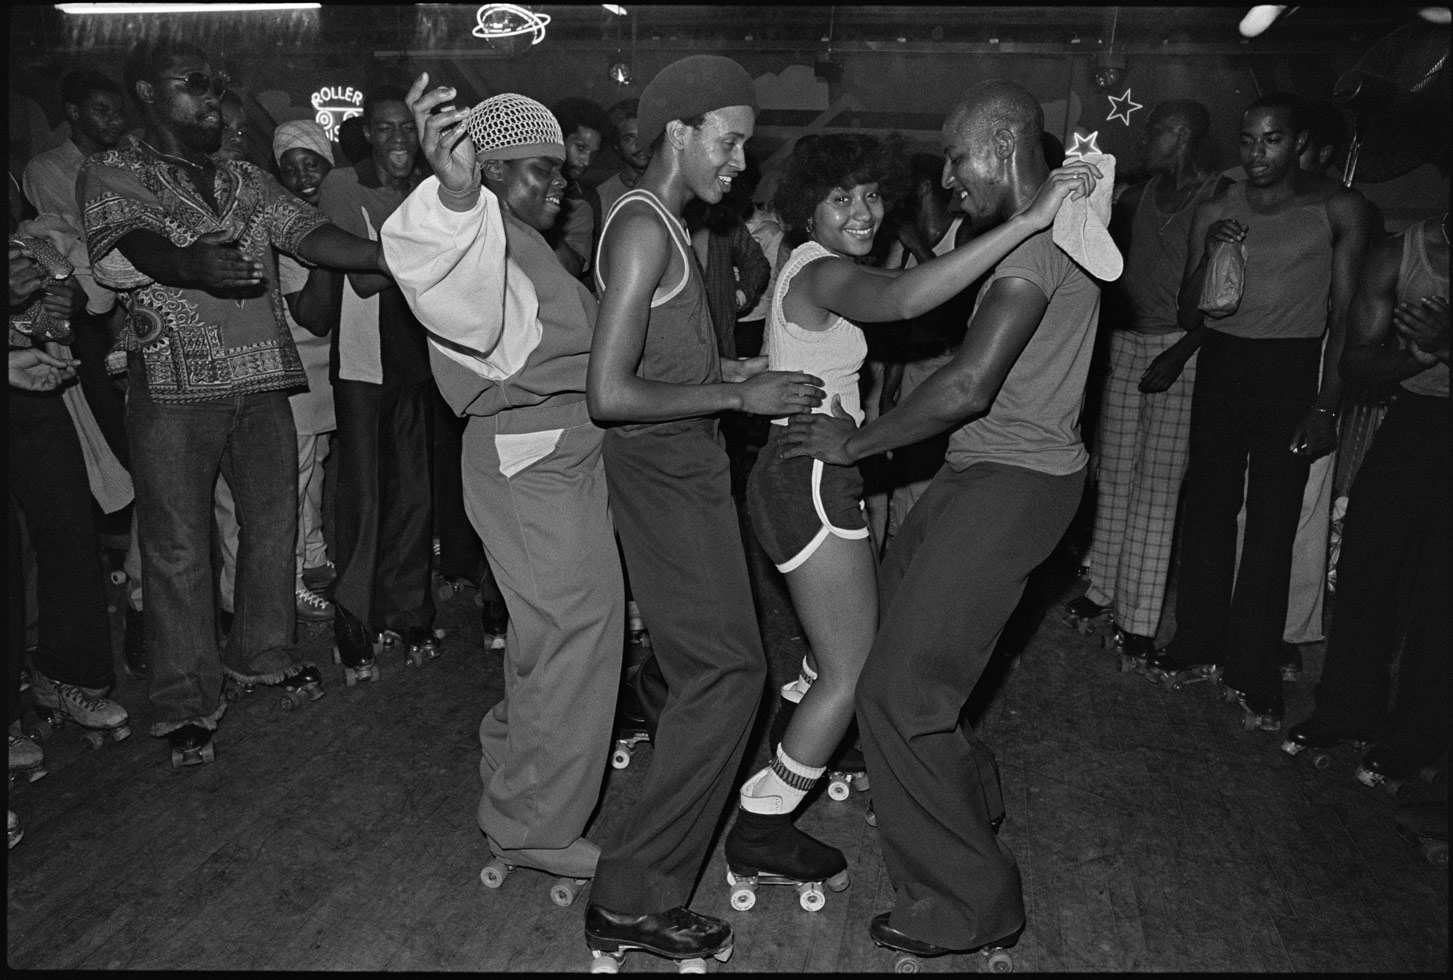 "The Empire Roller Skating Rink in Crown Heights, Brooklyn opened in 1941 and finally closed its doors in 2007. It converted into a roller disco in the 70s and then the roller rink organ was replaced with a sound system and DJ booth. Empire was usually packed with an African-American crowd but top skaters of all races and creeds also came."